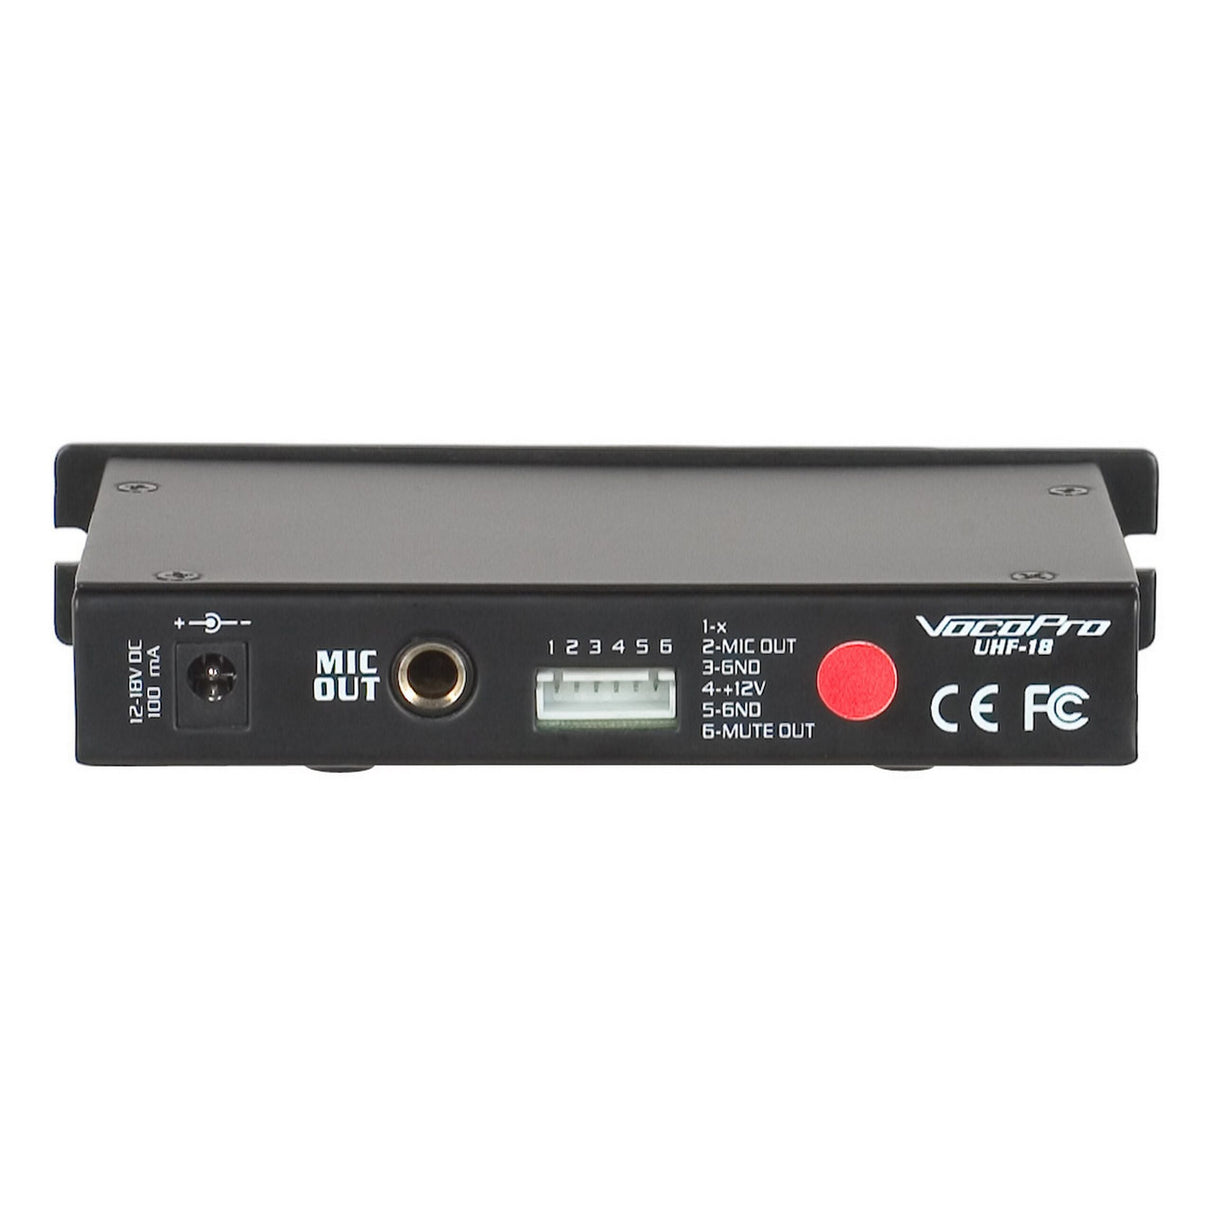 VocoPro UHF-18 Single Channel UHF Wireless Microphone System, 9 Frequency